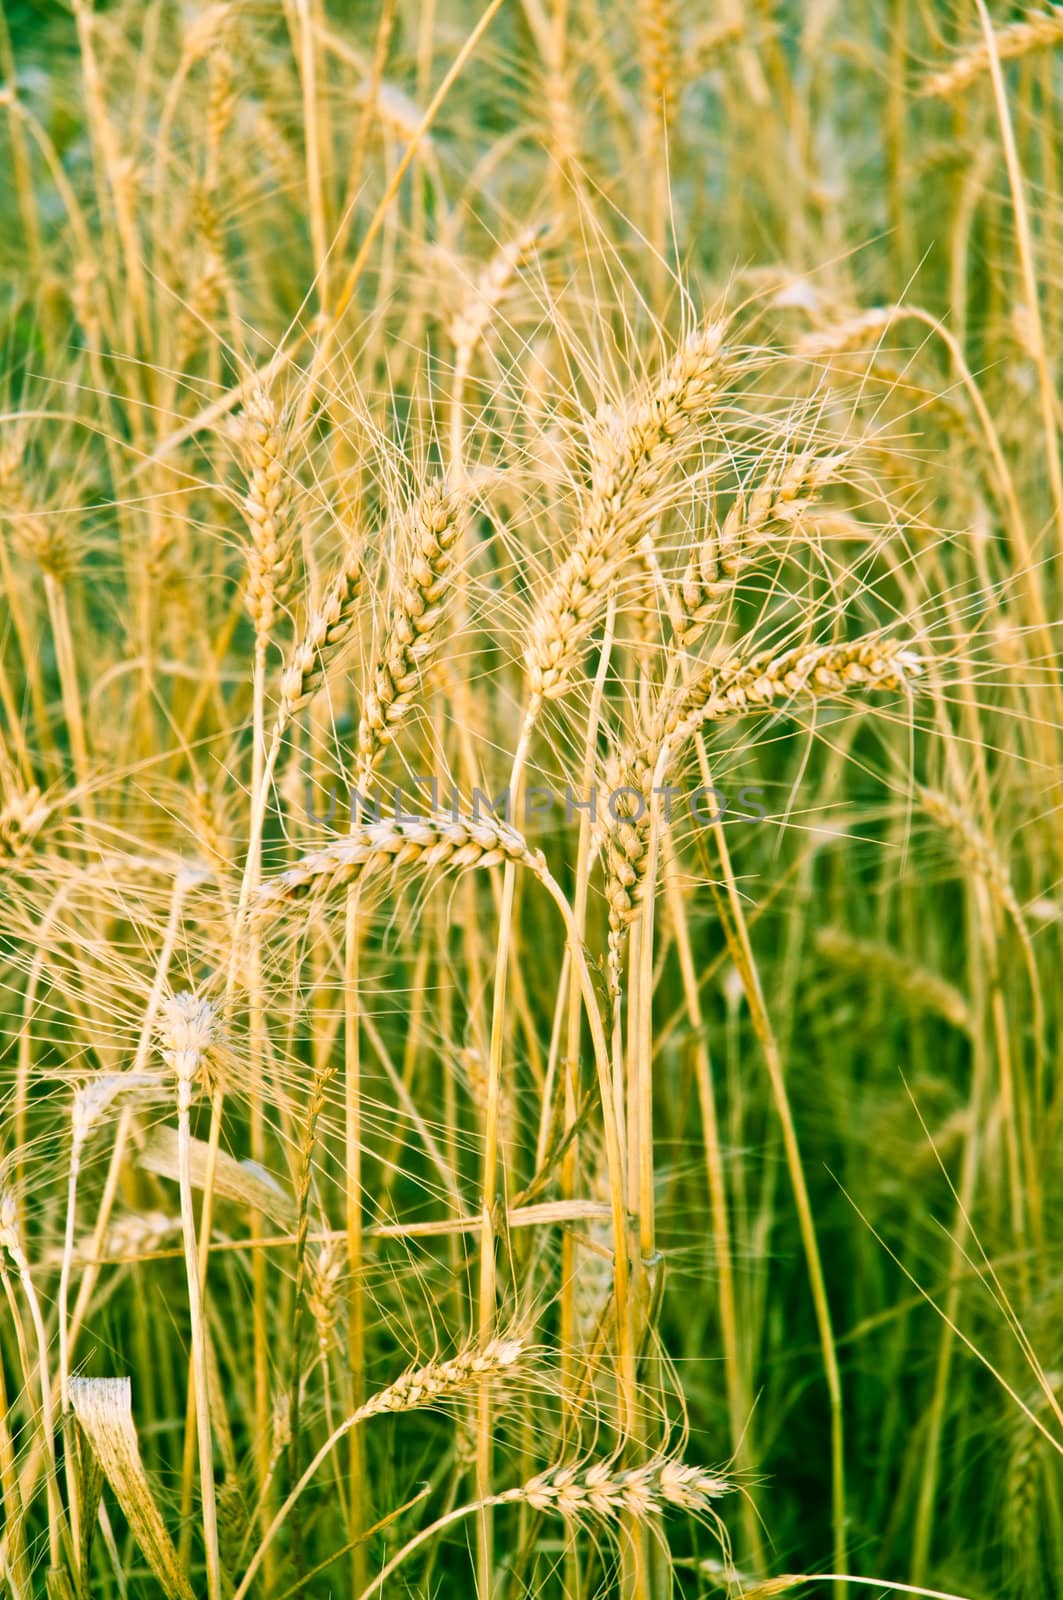 Wheat growing in a field on an abstract background.